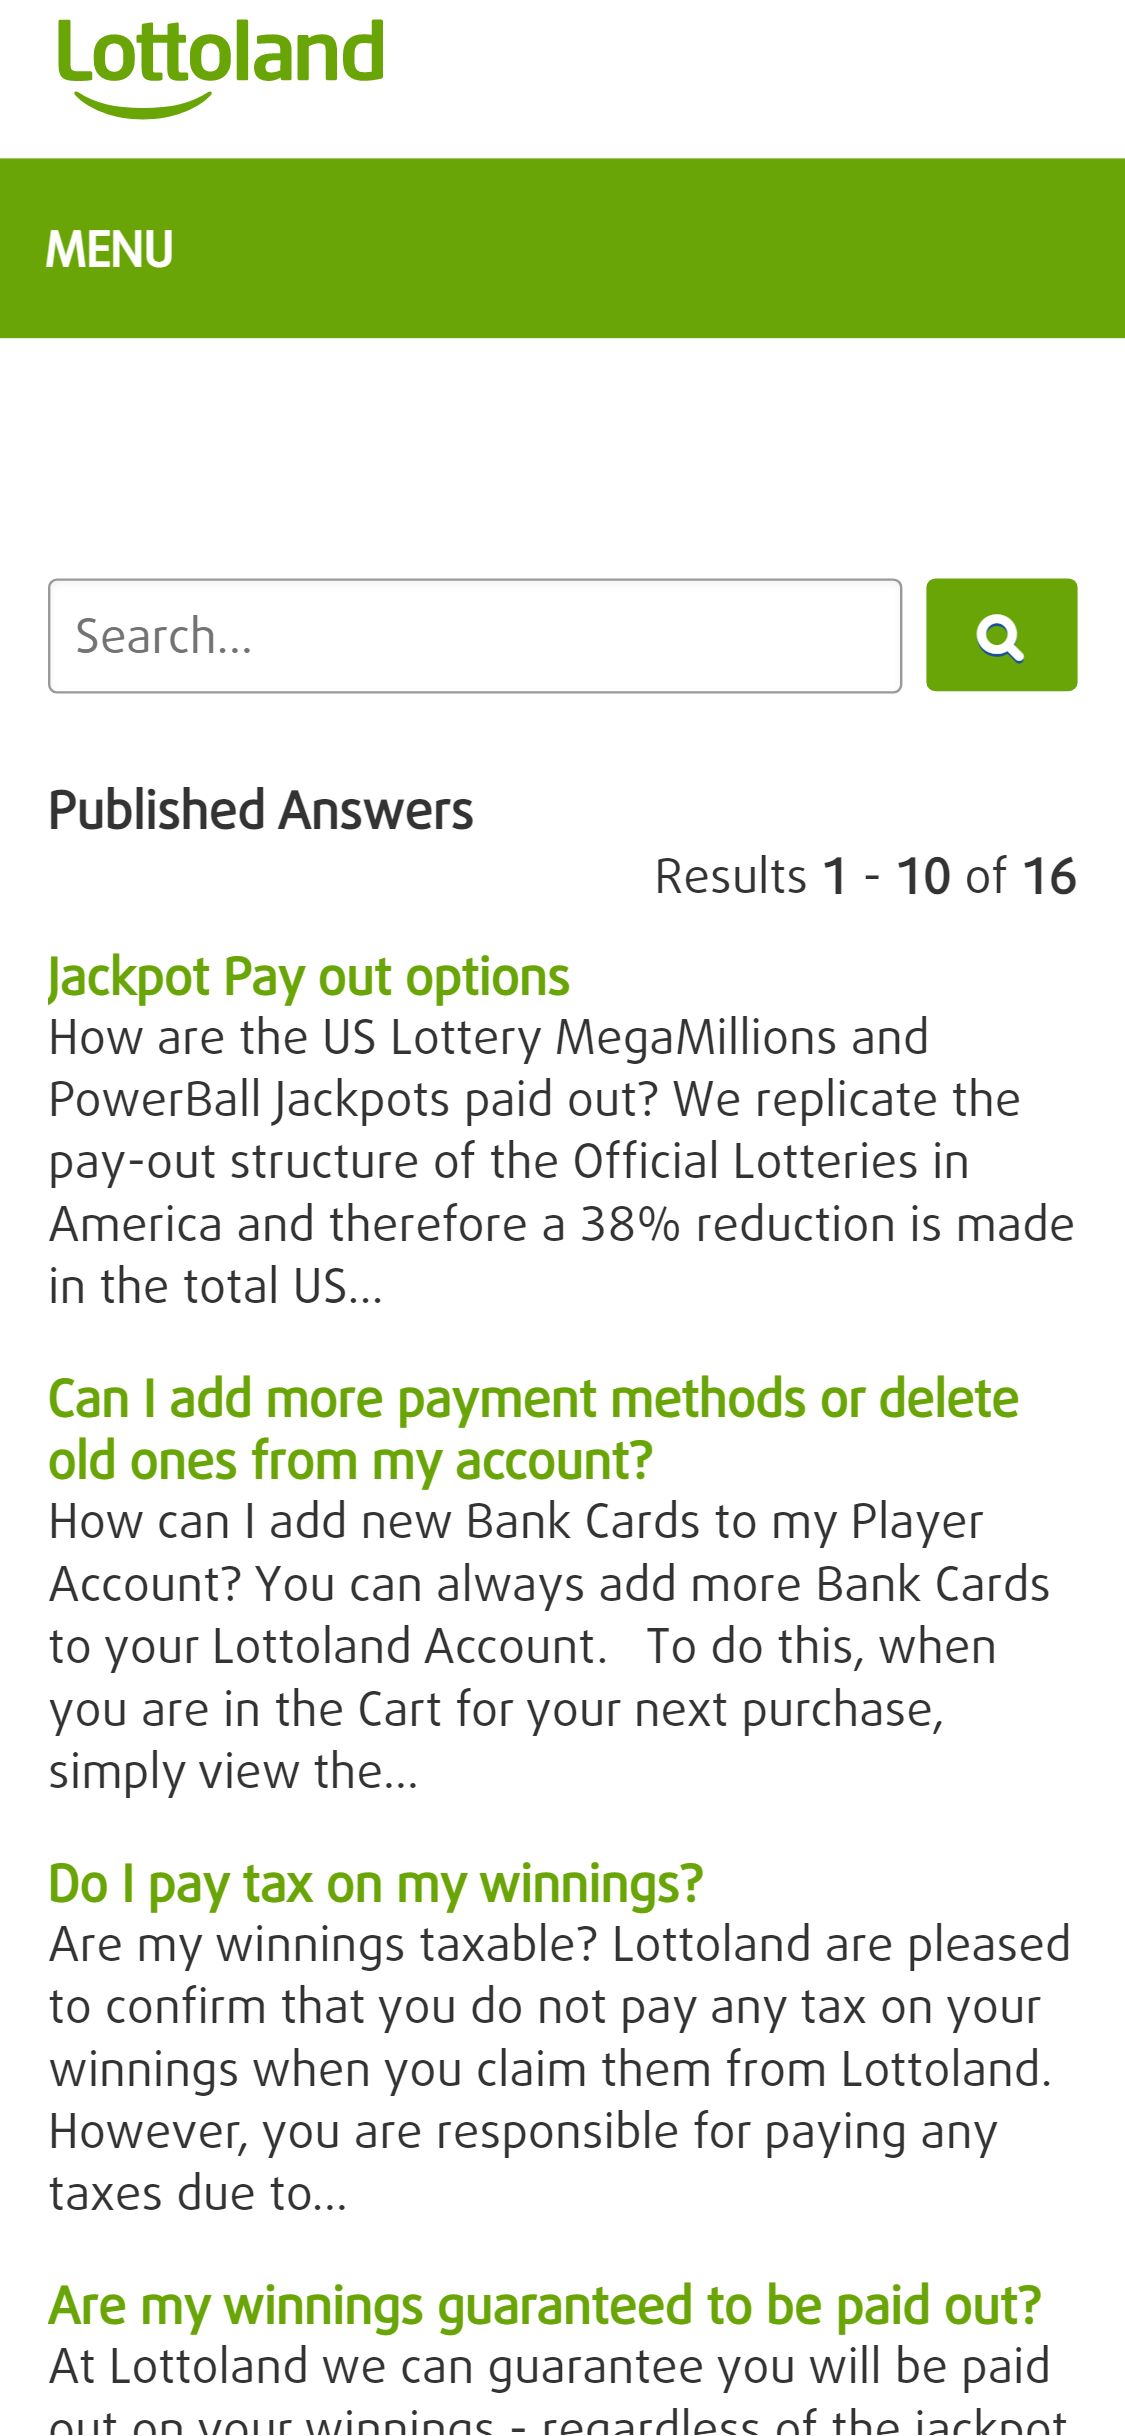 Lottoland Mobile Payment Methods Review